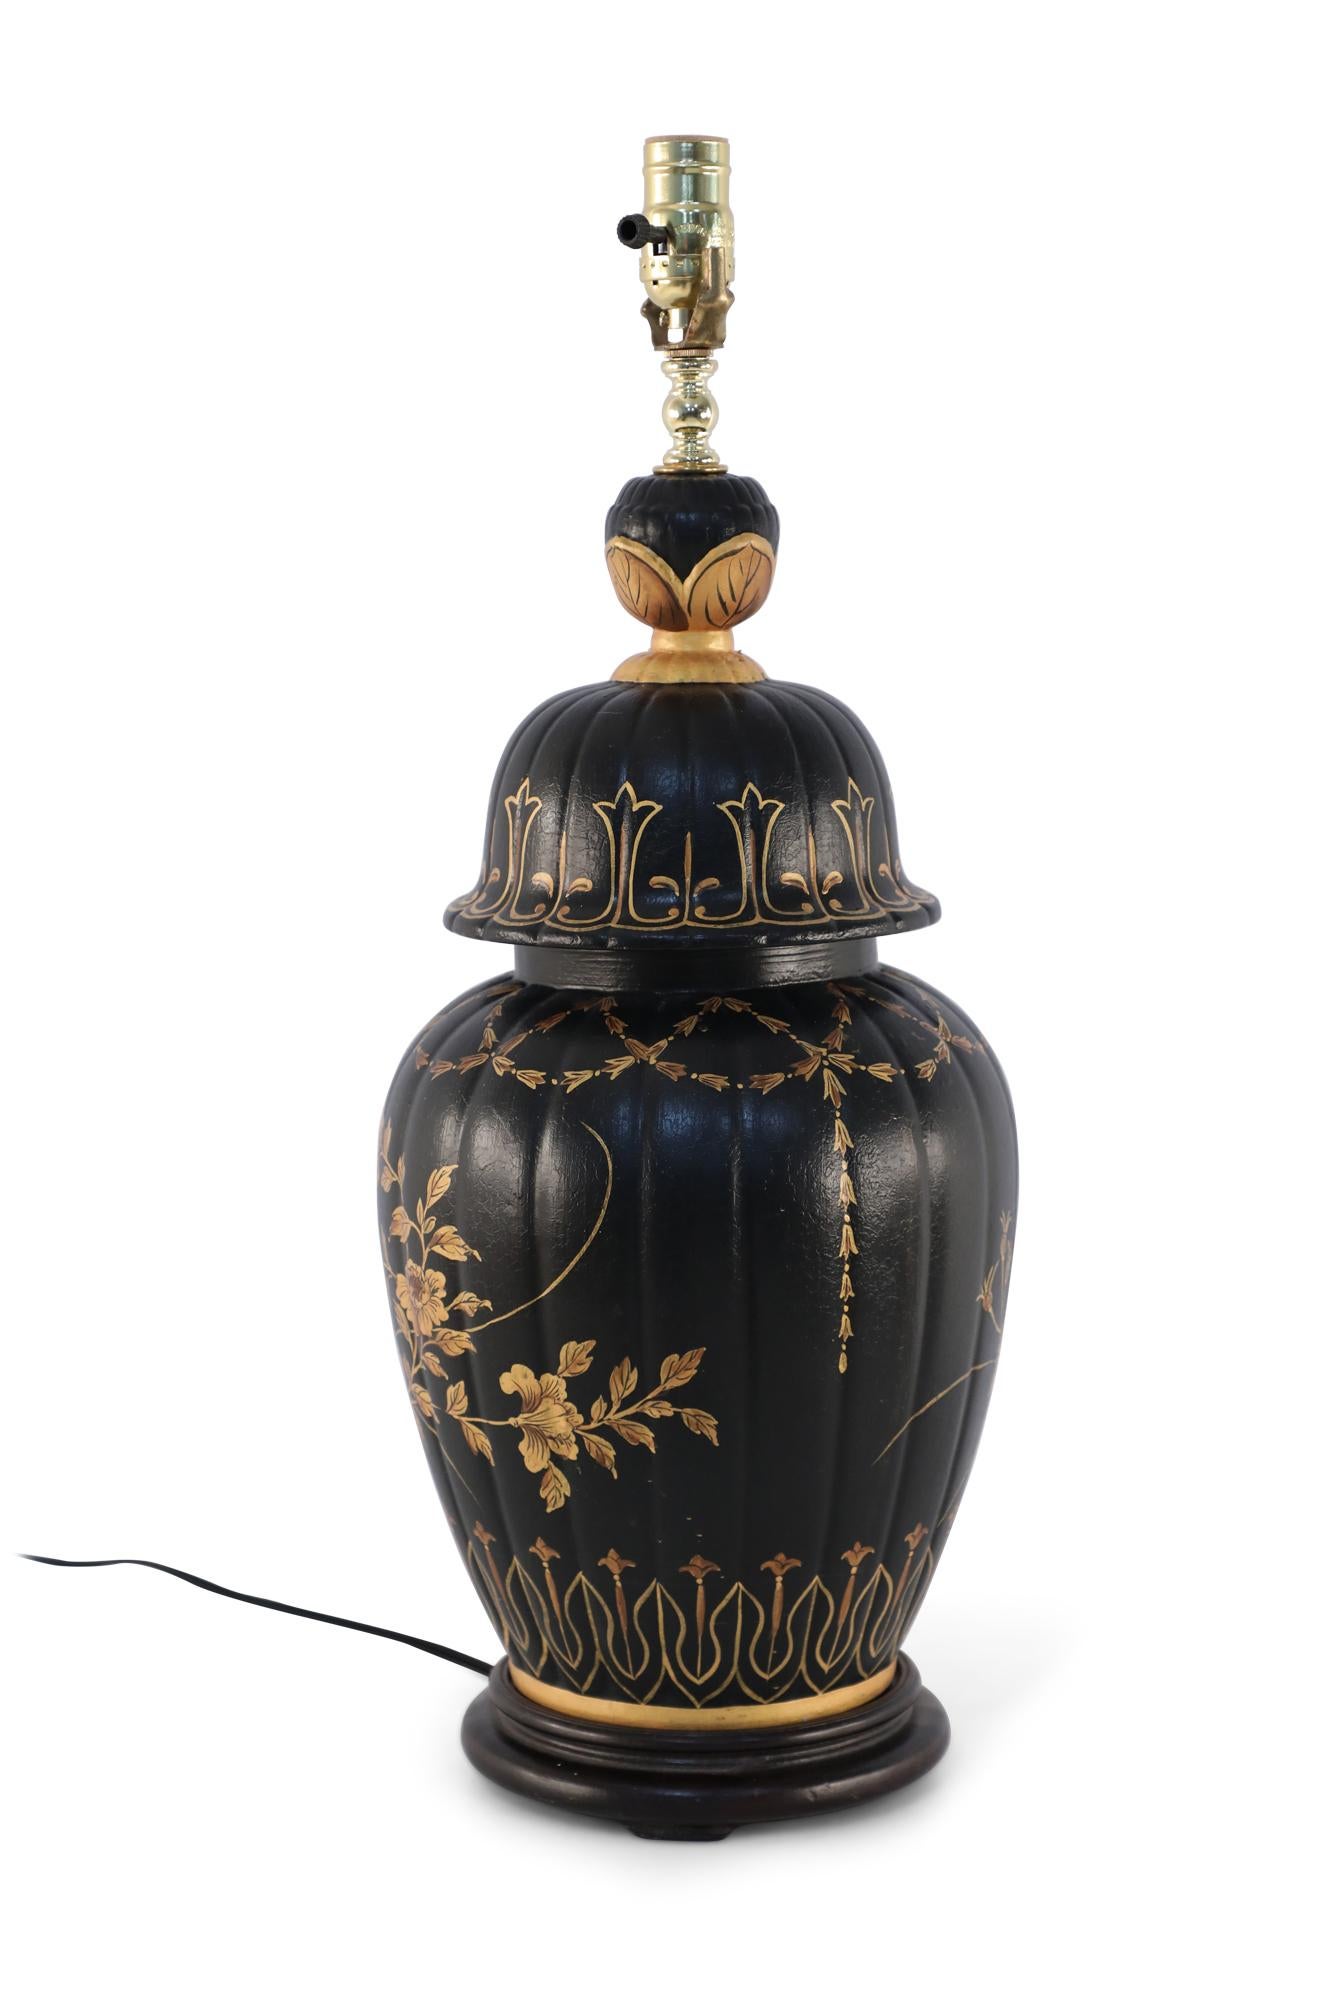 Chinese black porcelain table lamp made from a lidded urn decorated in gold florals, swag foliage, and geometric patterns sitting atop a wooden base fitted with brass hardware.